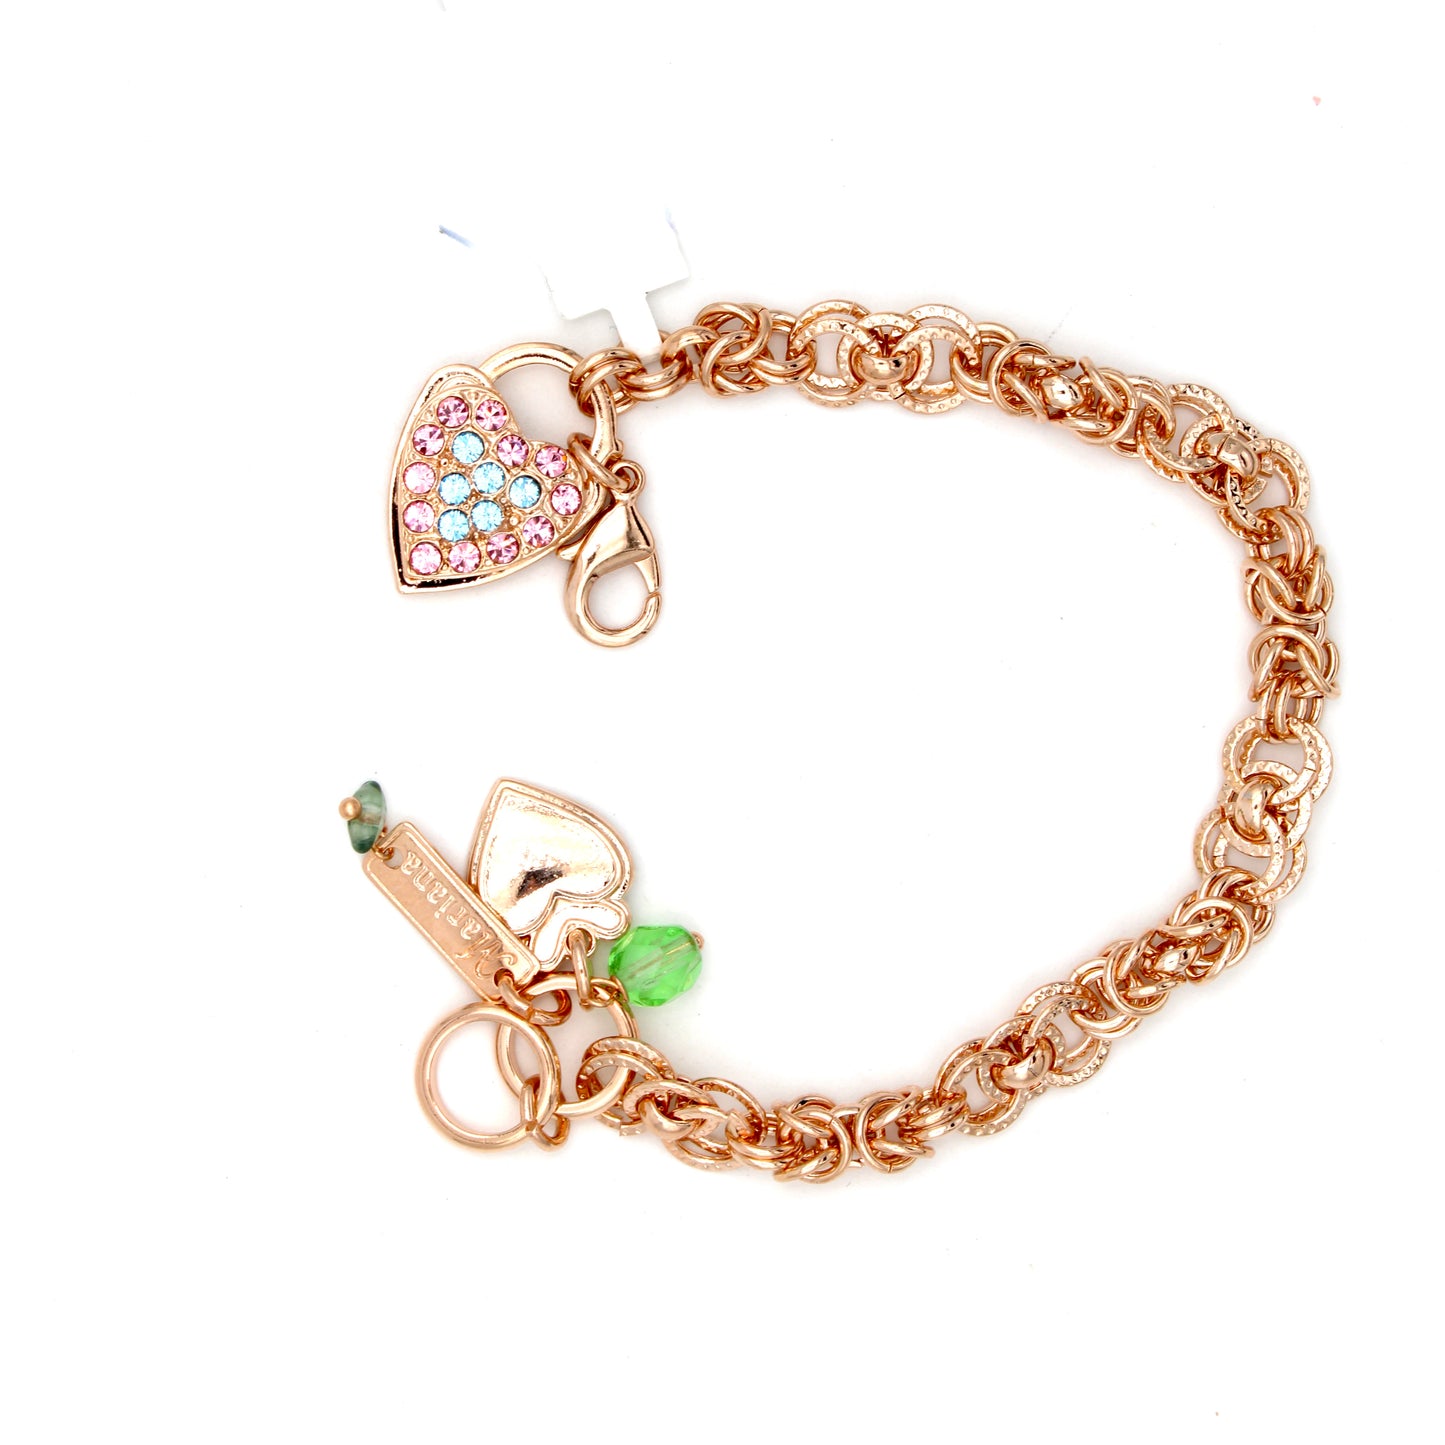 Funfetti Collection Heart Bracelet in Rose Gold - MaryTyke's